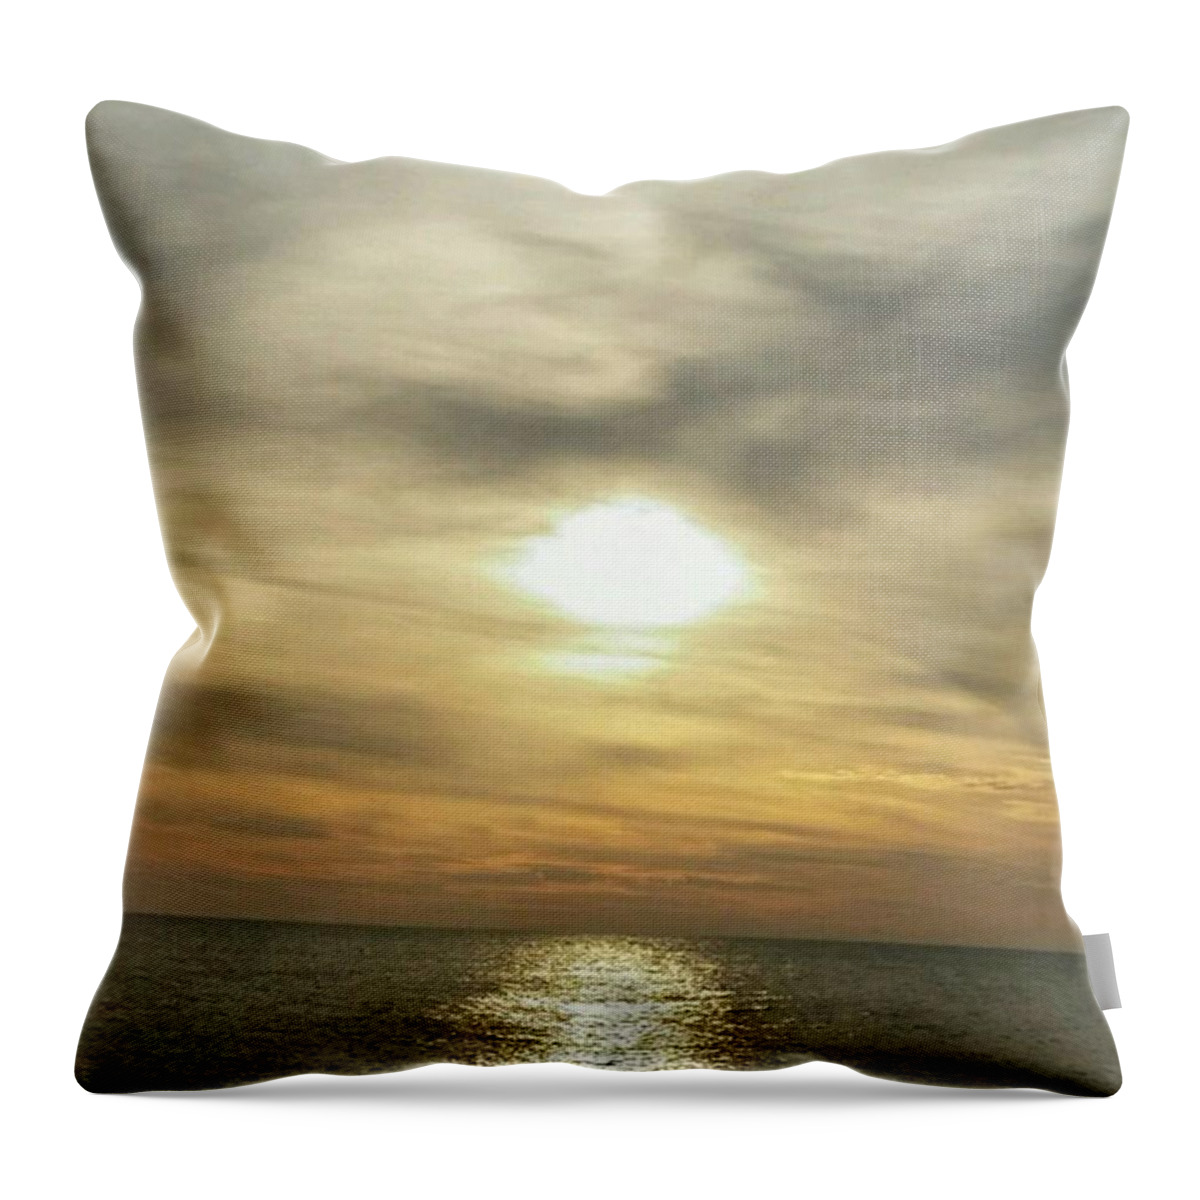 Evening Throw Pillow featuring the photograph The reflecting sun by Kimberly W